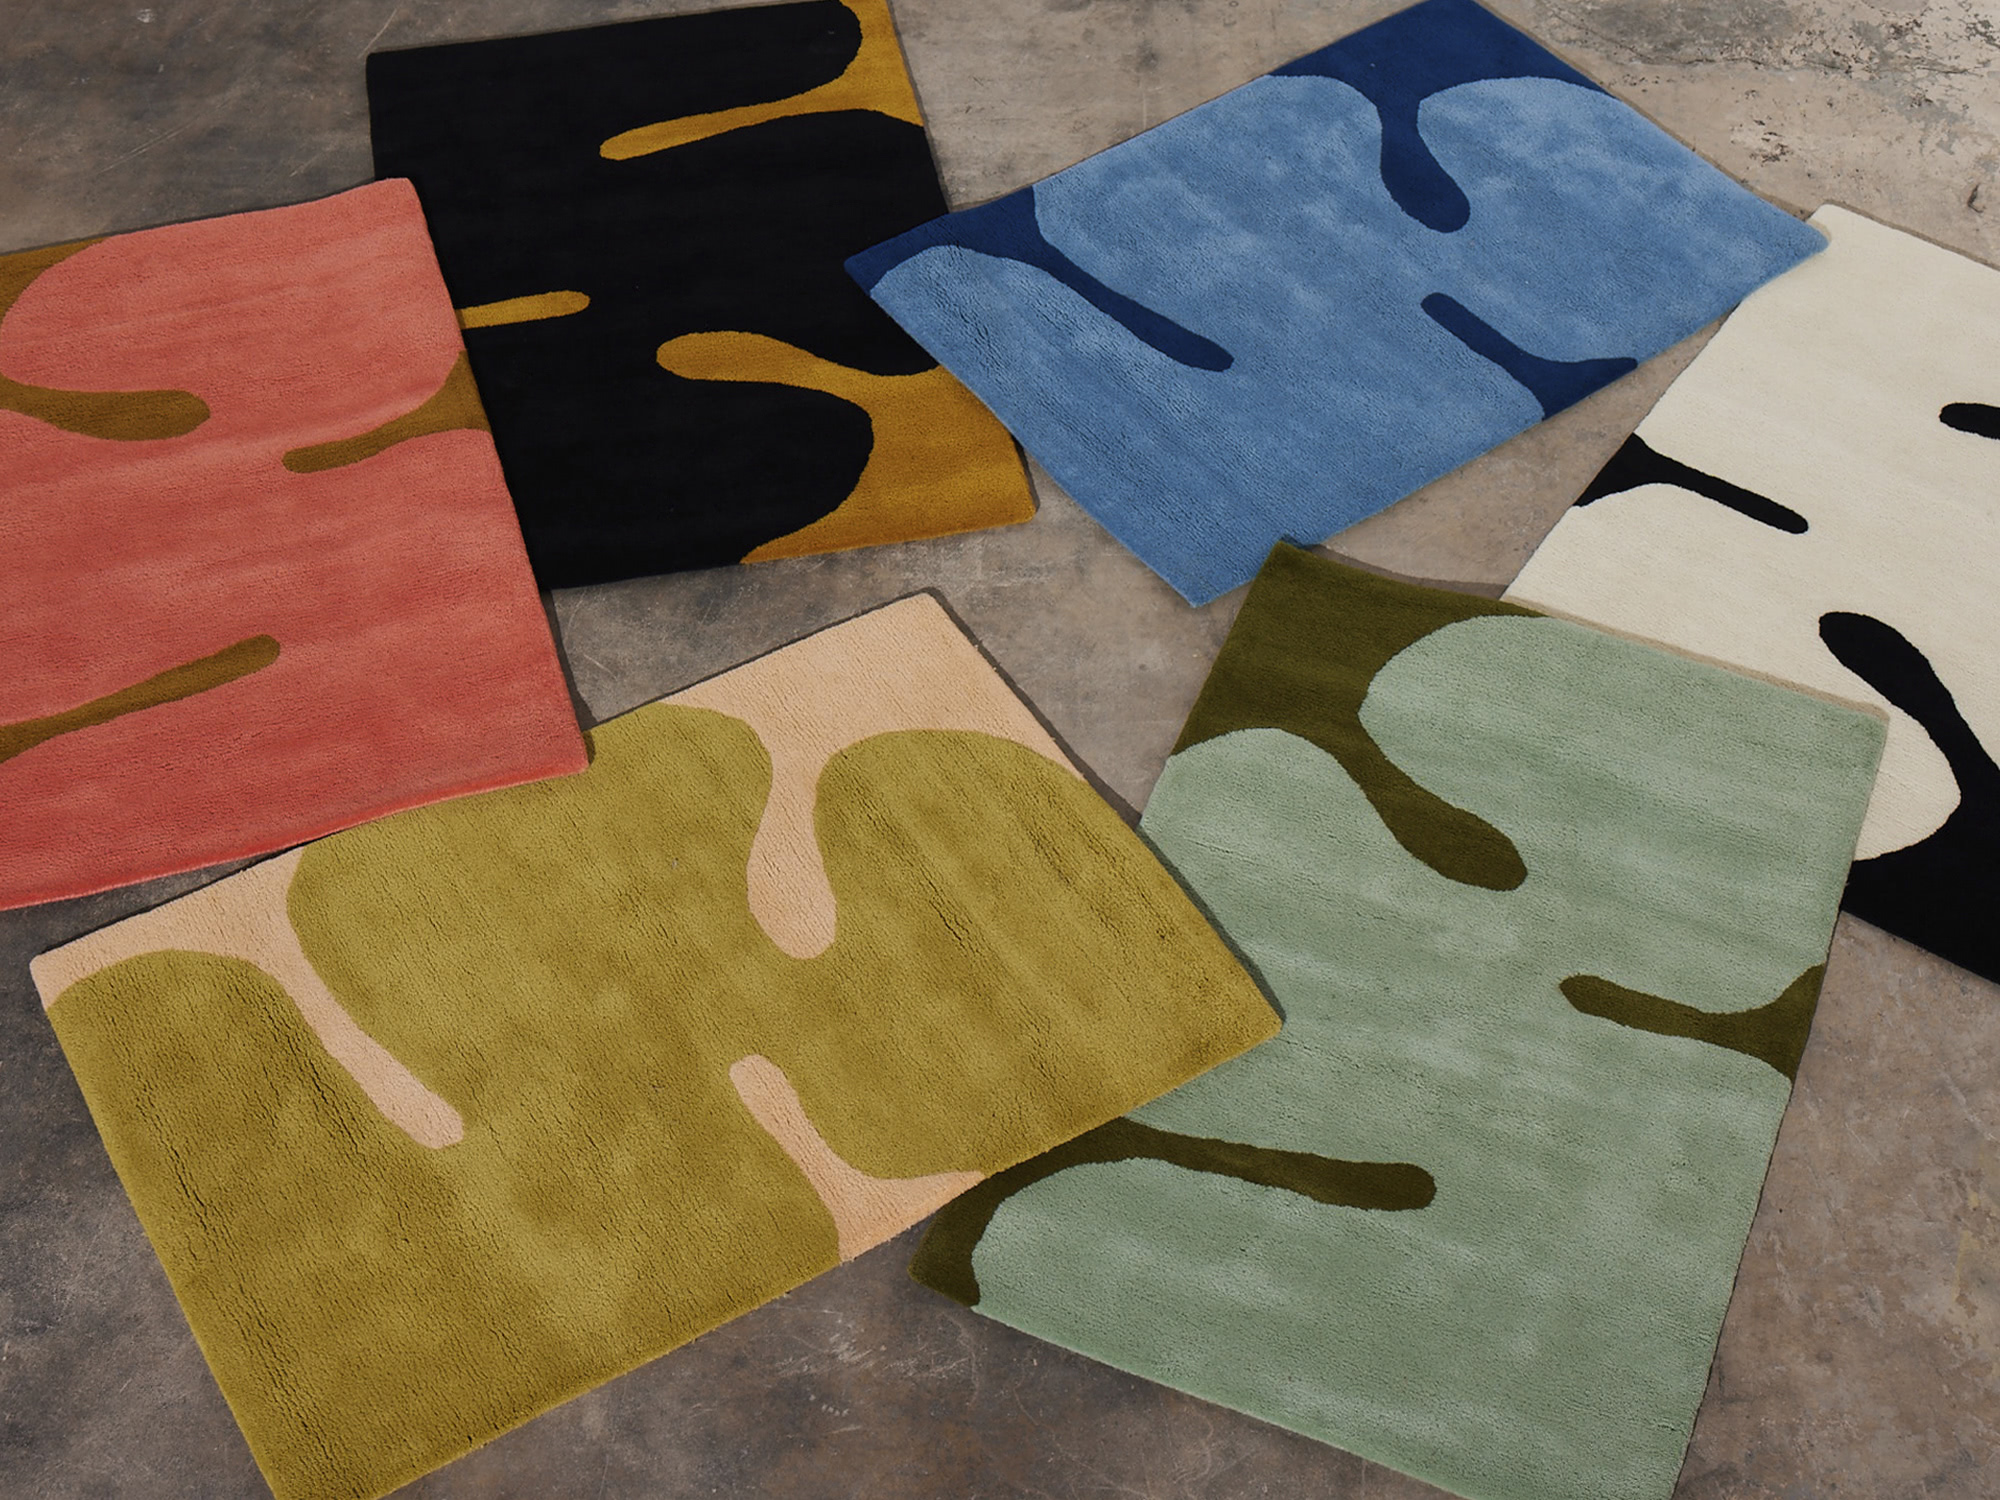 A series of rugs all in the same organic pattern but different colors called Astrud